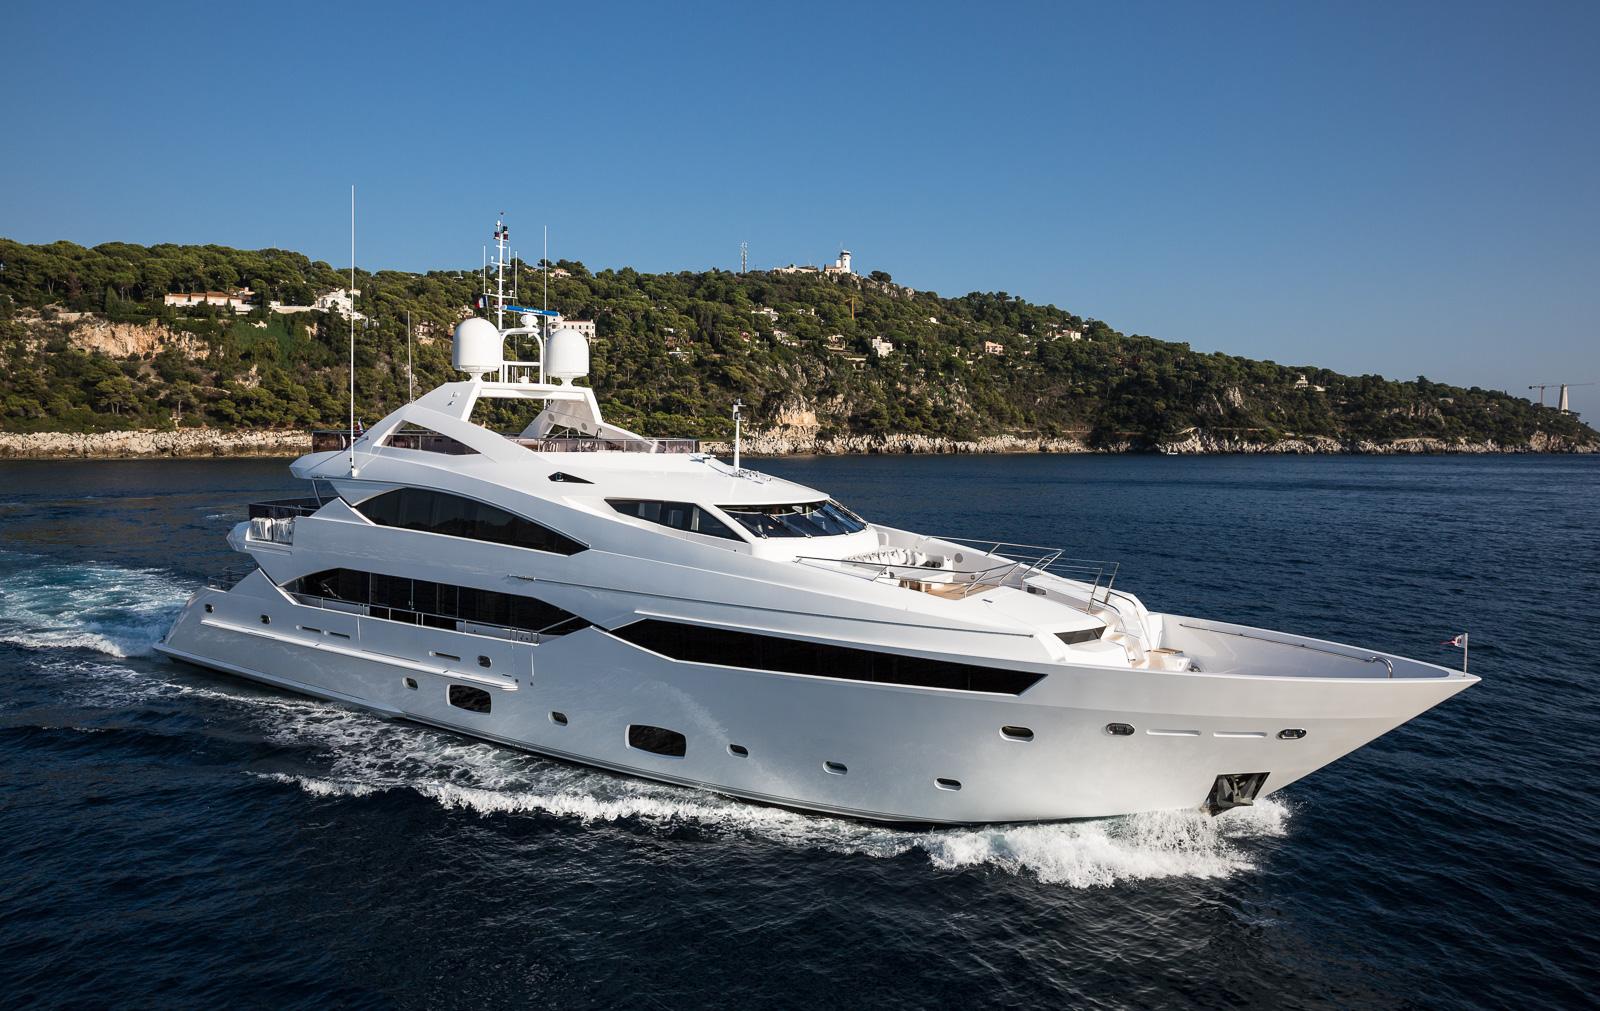 Port side of Sunseeker motor yacht Thumper, chartering with Bluemoon